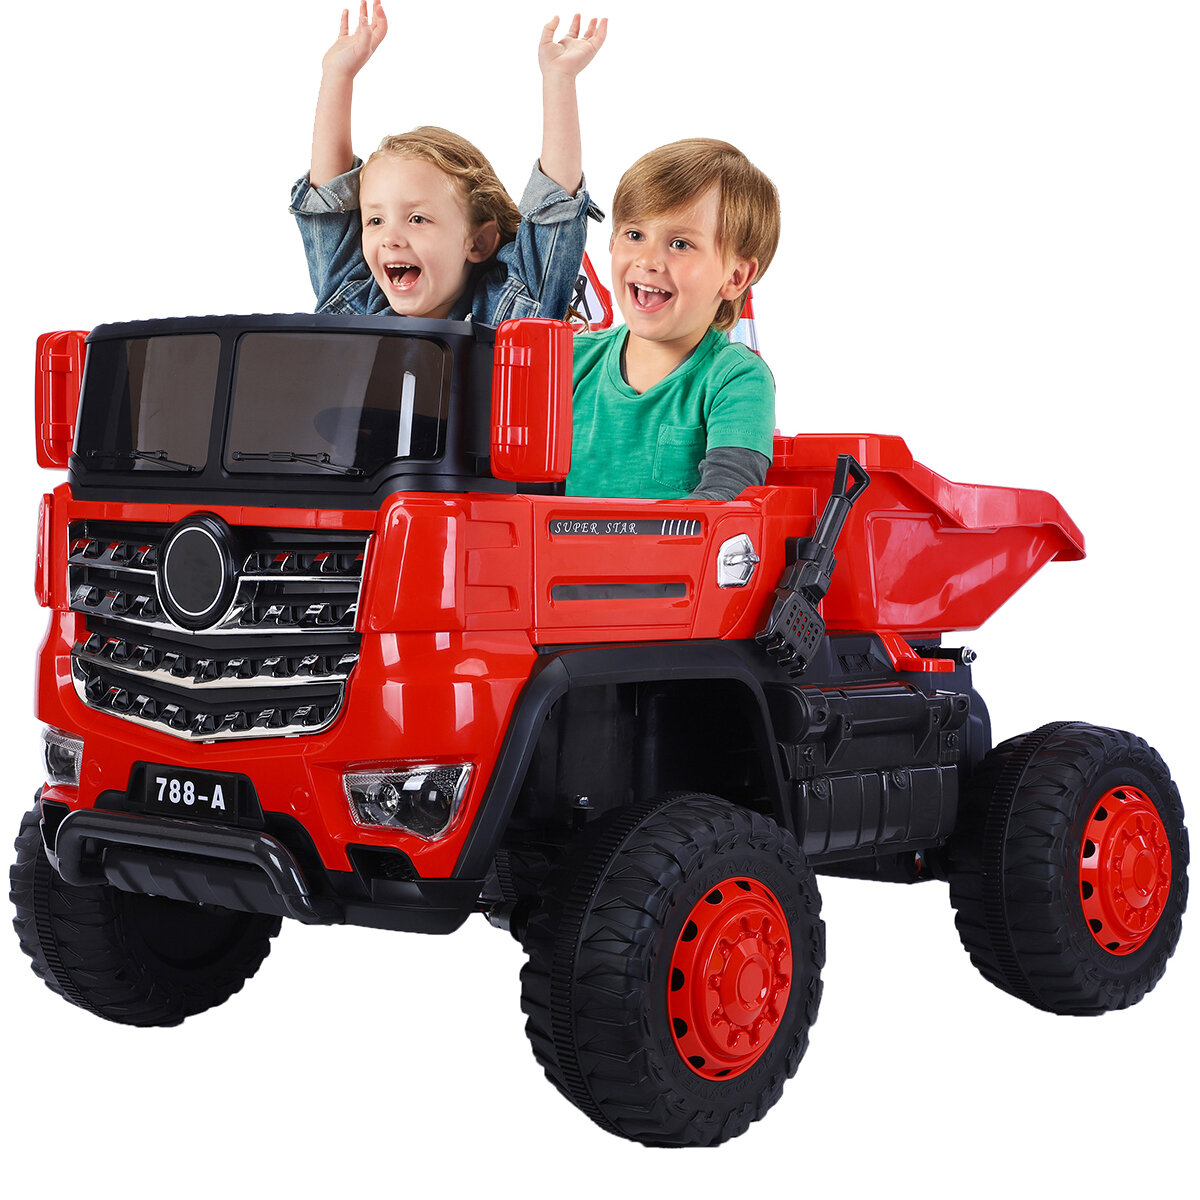 Image of 788-A 4WD 2 Seater Ride On for Kids Electric Car390 Motor Plus 1210 Battery Powered Four-wheel Drive Engineering Vehi